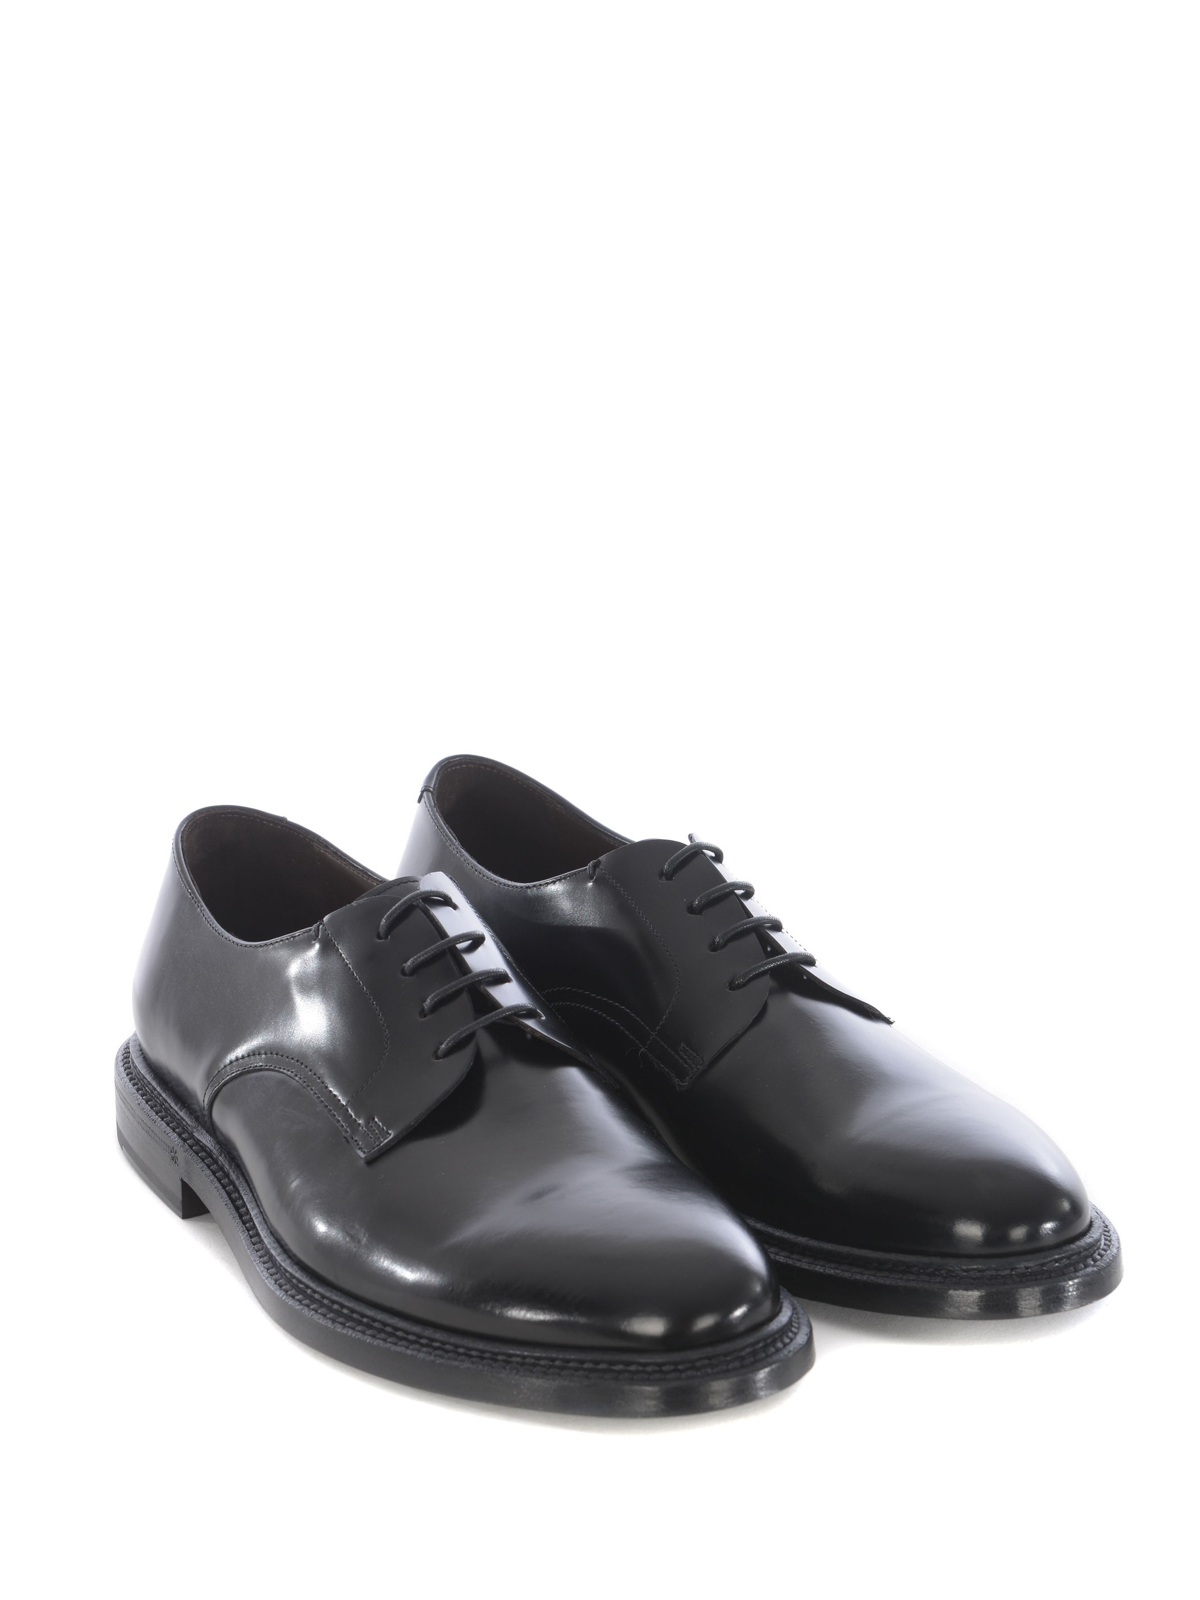 Lace-ups shoes Green George - Polished leather black derby shoes ...